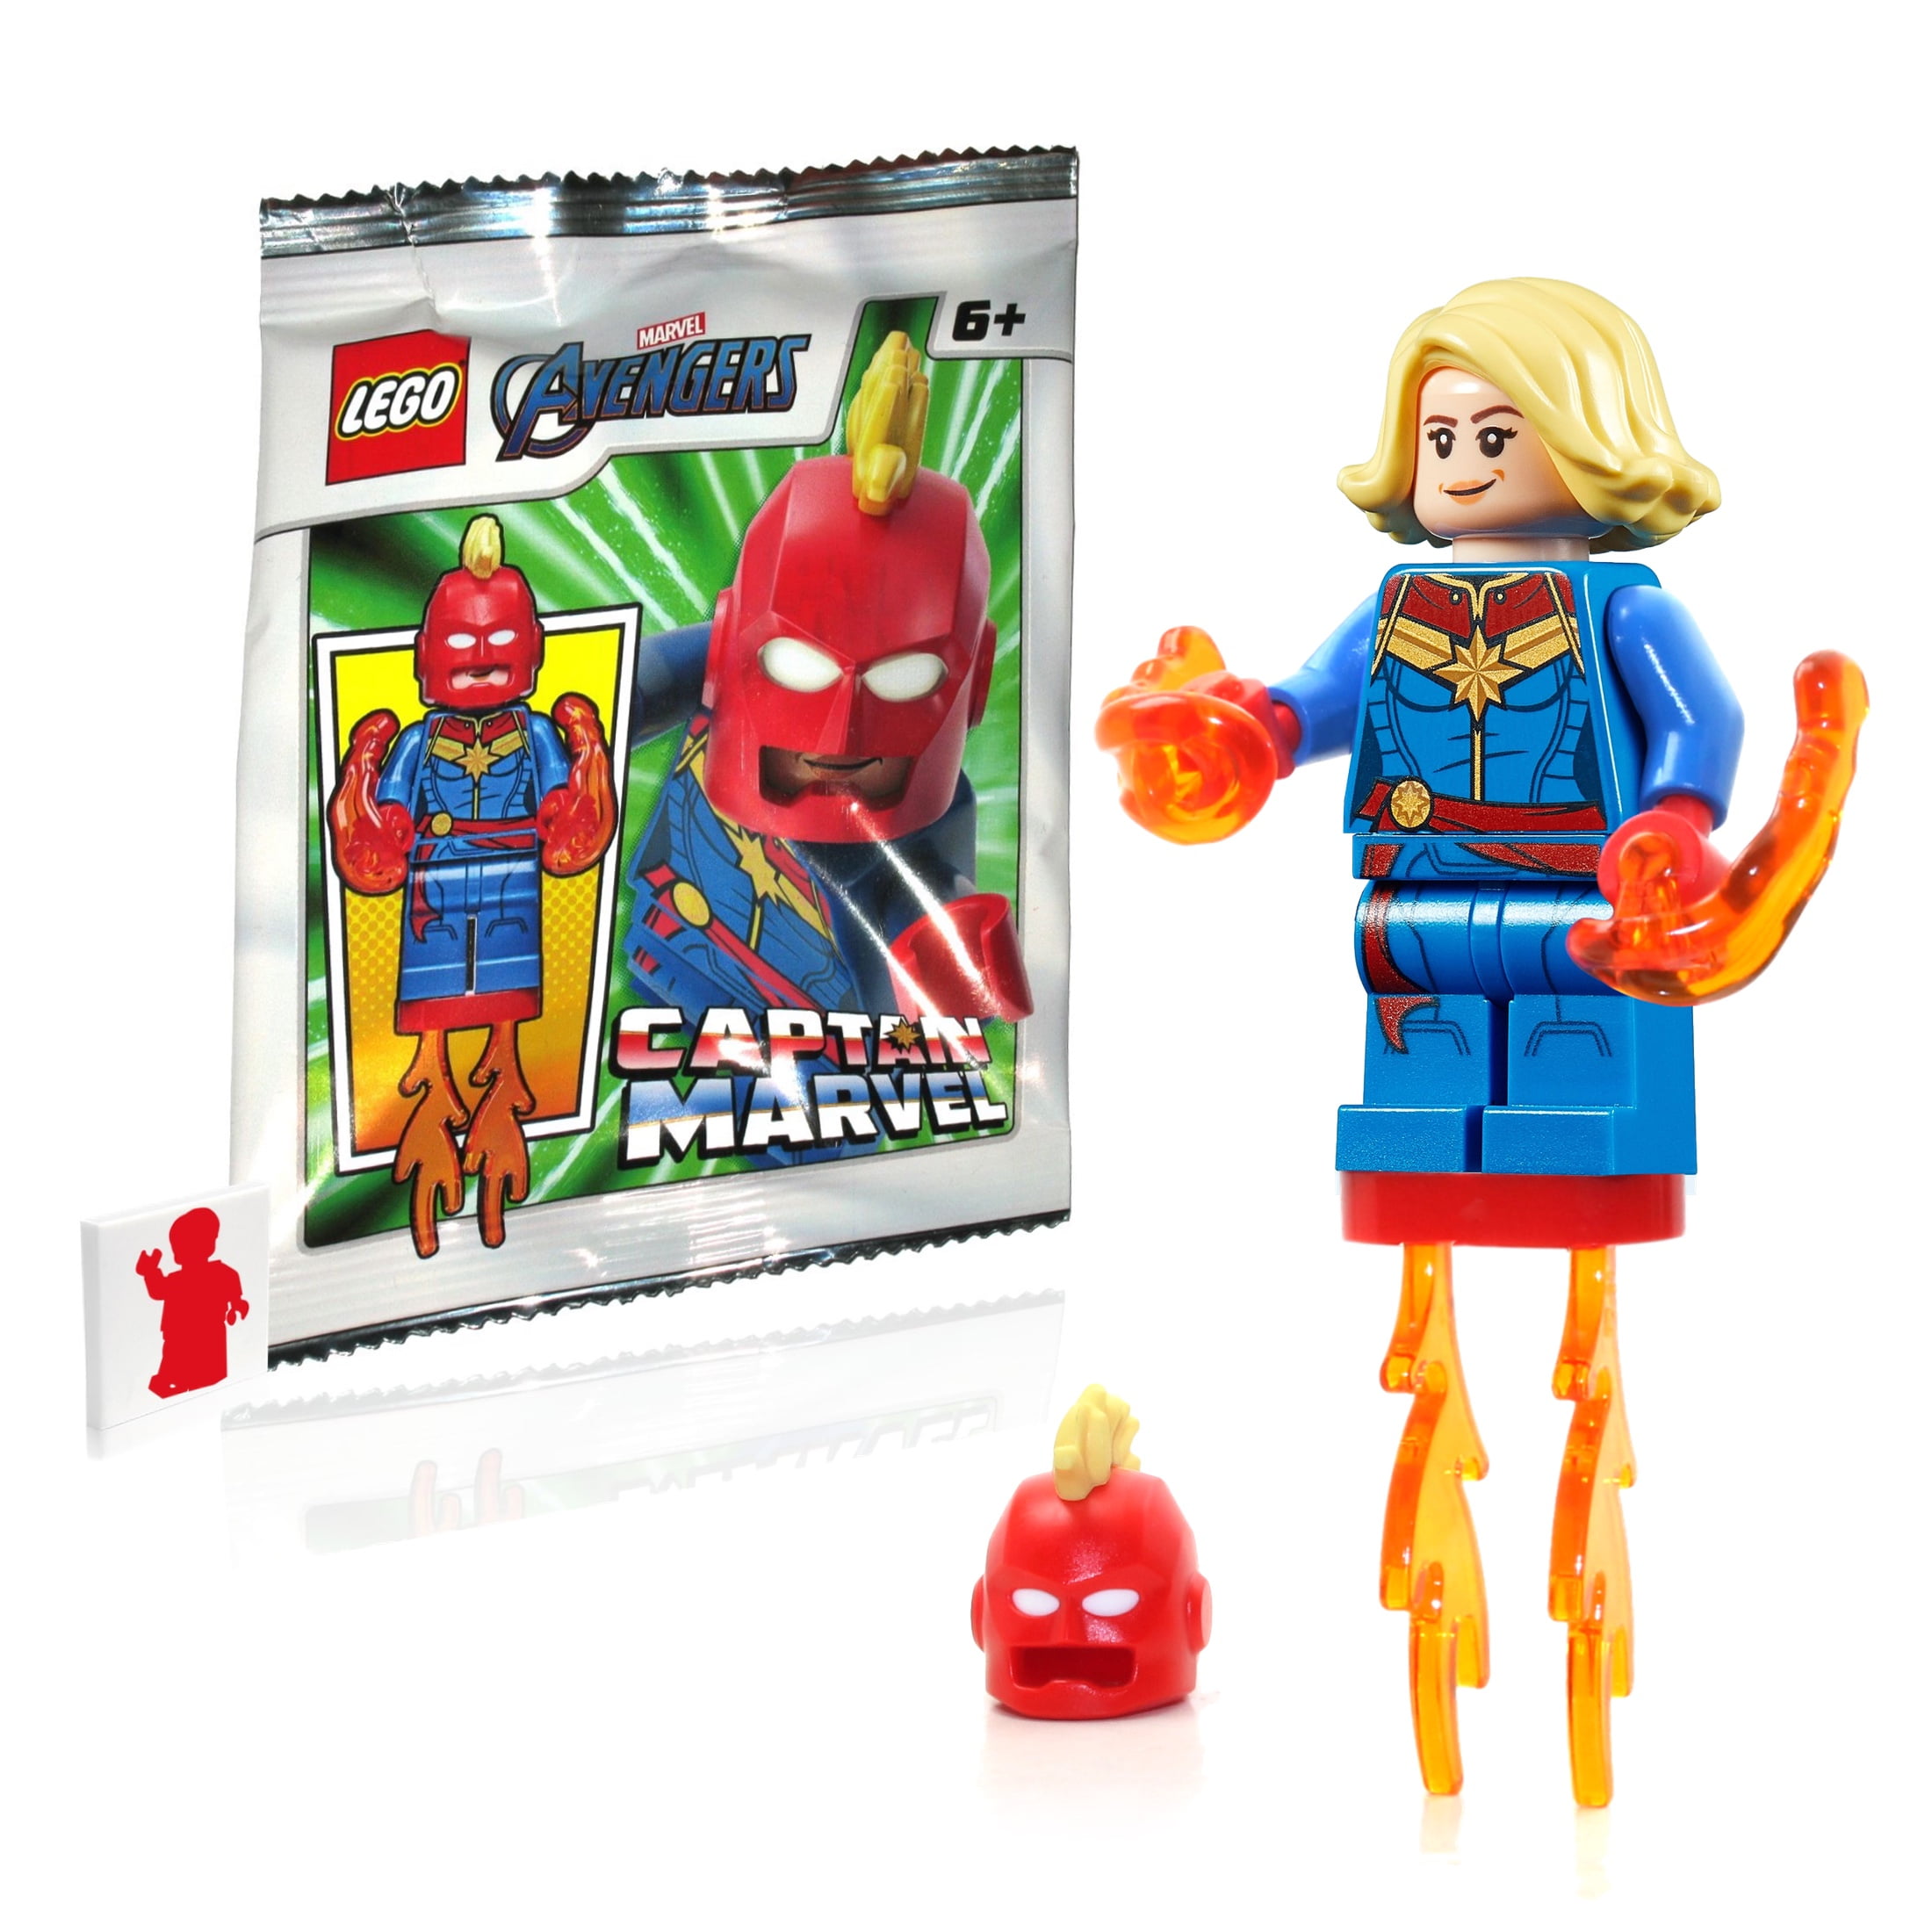 Details about   LEGO MINI FIGURES MARVEL DC SUPER HEROES BATMAN MOVIE FIGURE LOTS TO CHOOSE FROM 